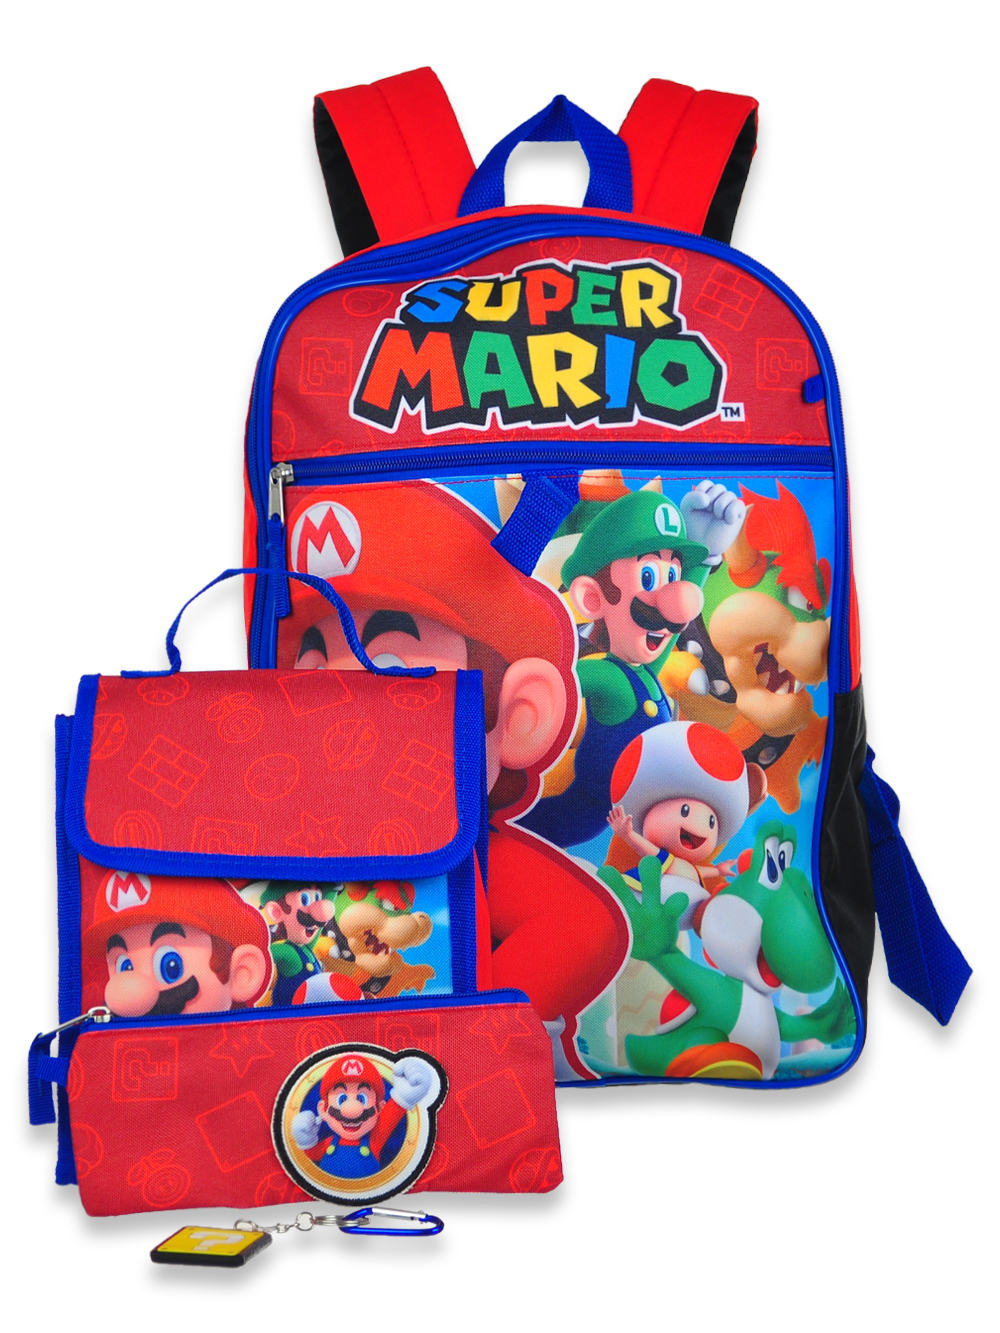 Super Mario Boys' 5-Piece Backpack & Lunchbox Set - red/multi, one size